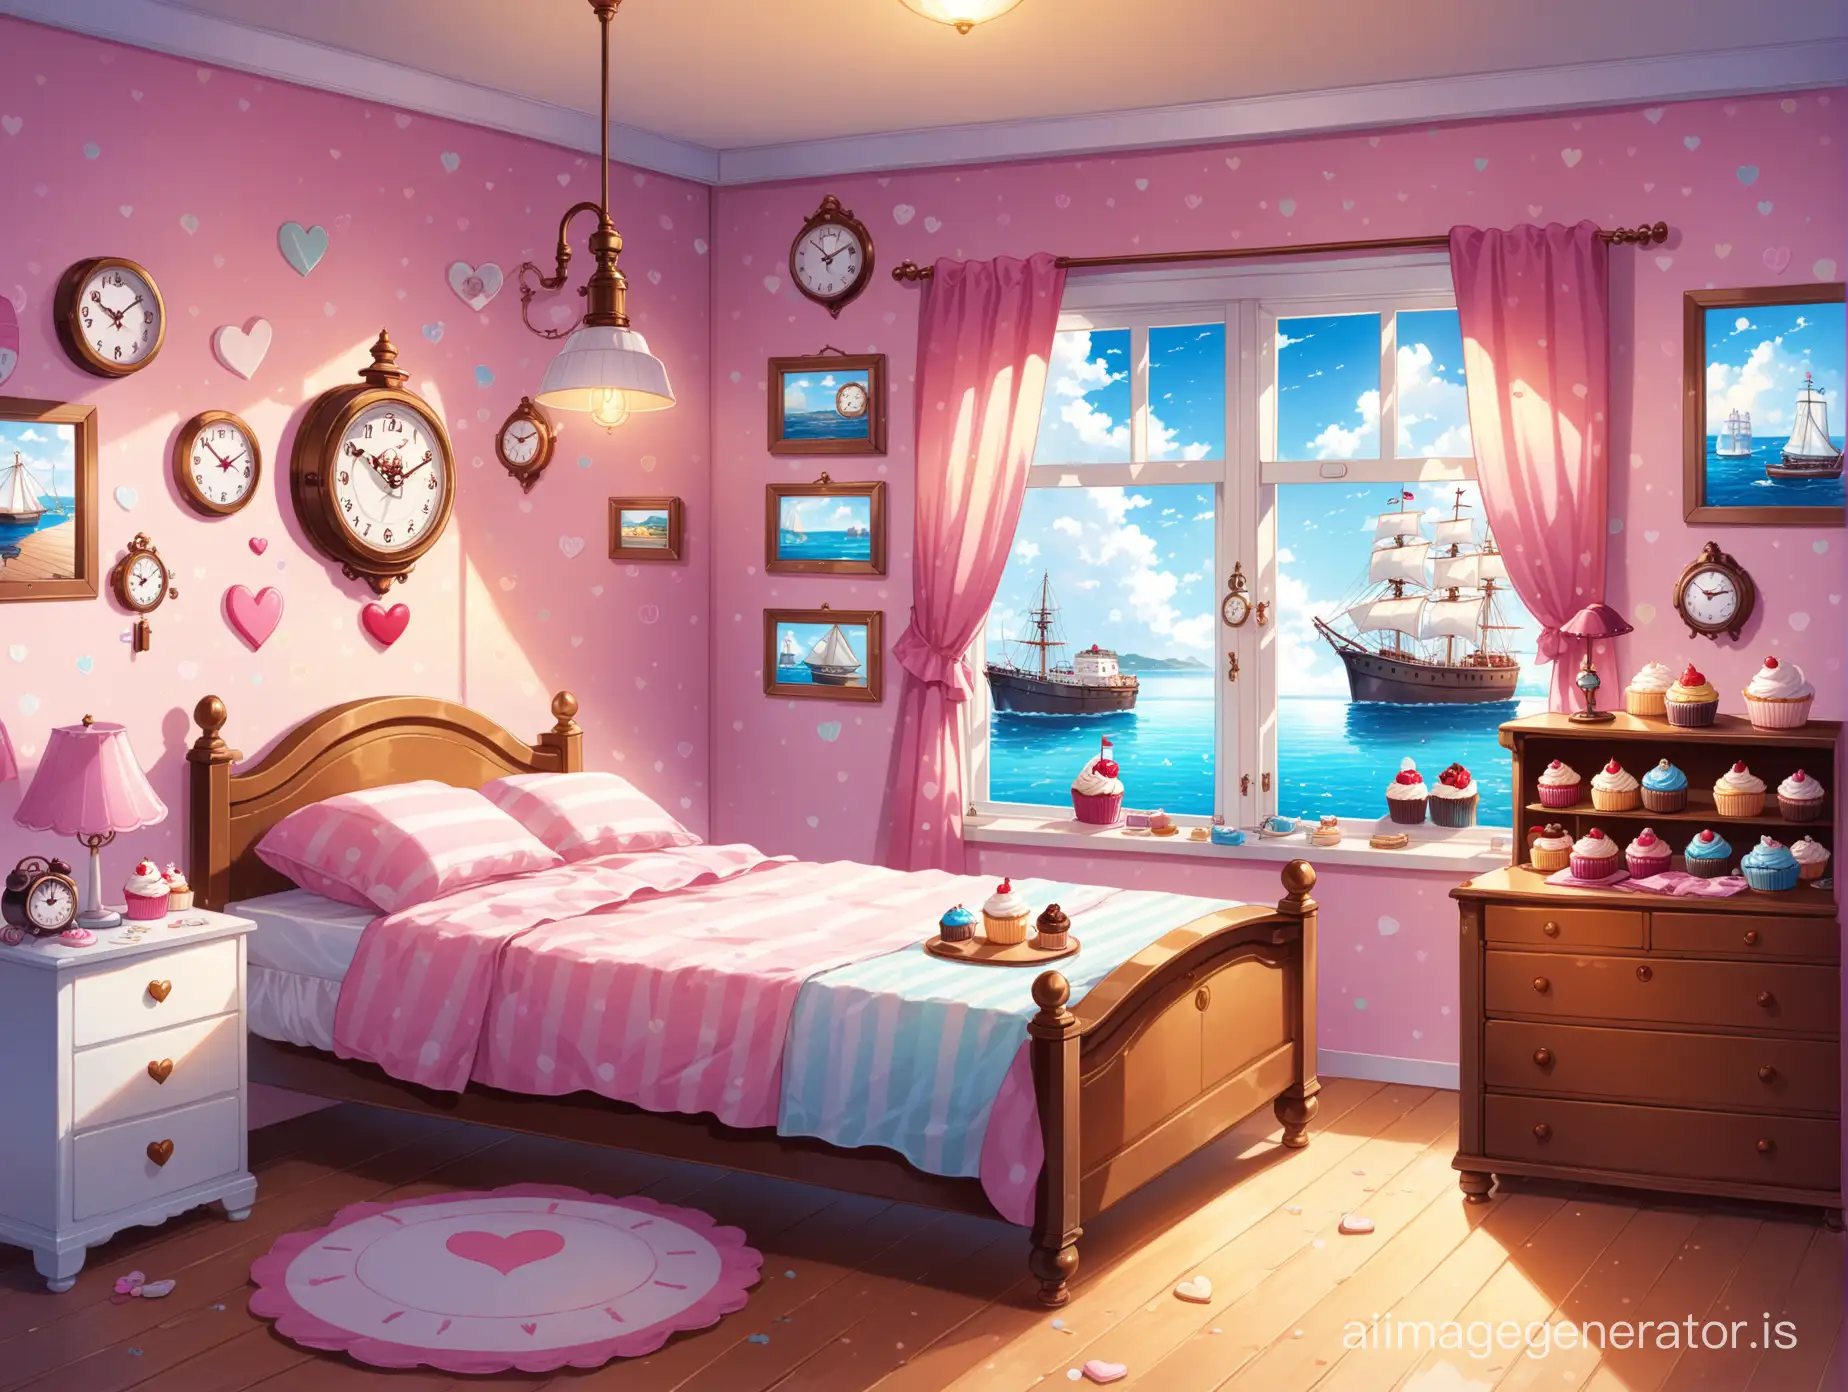 A bedroom with a messy bed, a window with a view of the sea, a dresser with a clock, a cupcake, a lamp, a ship painting, a key, a heart, a clock, a cupcake, and a heart.